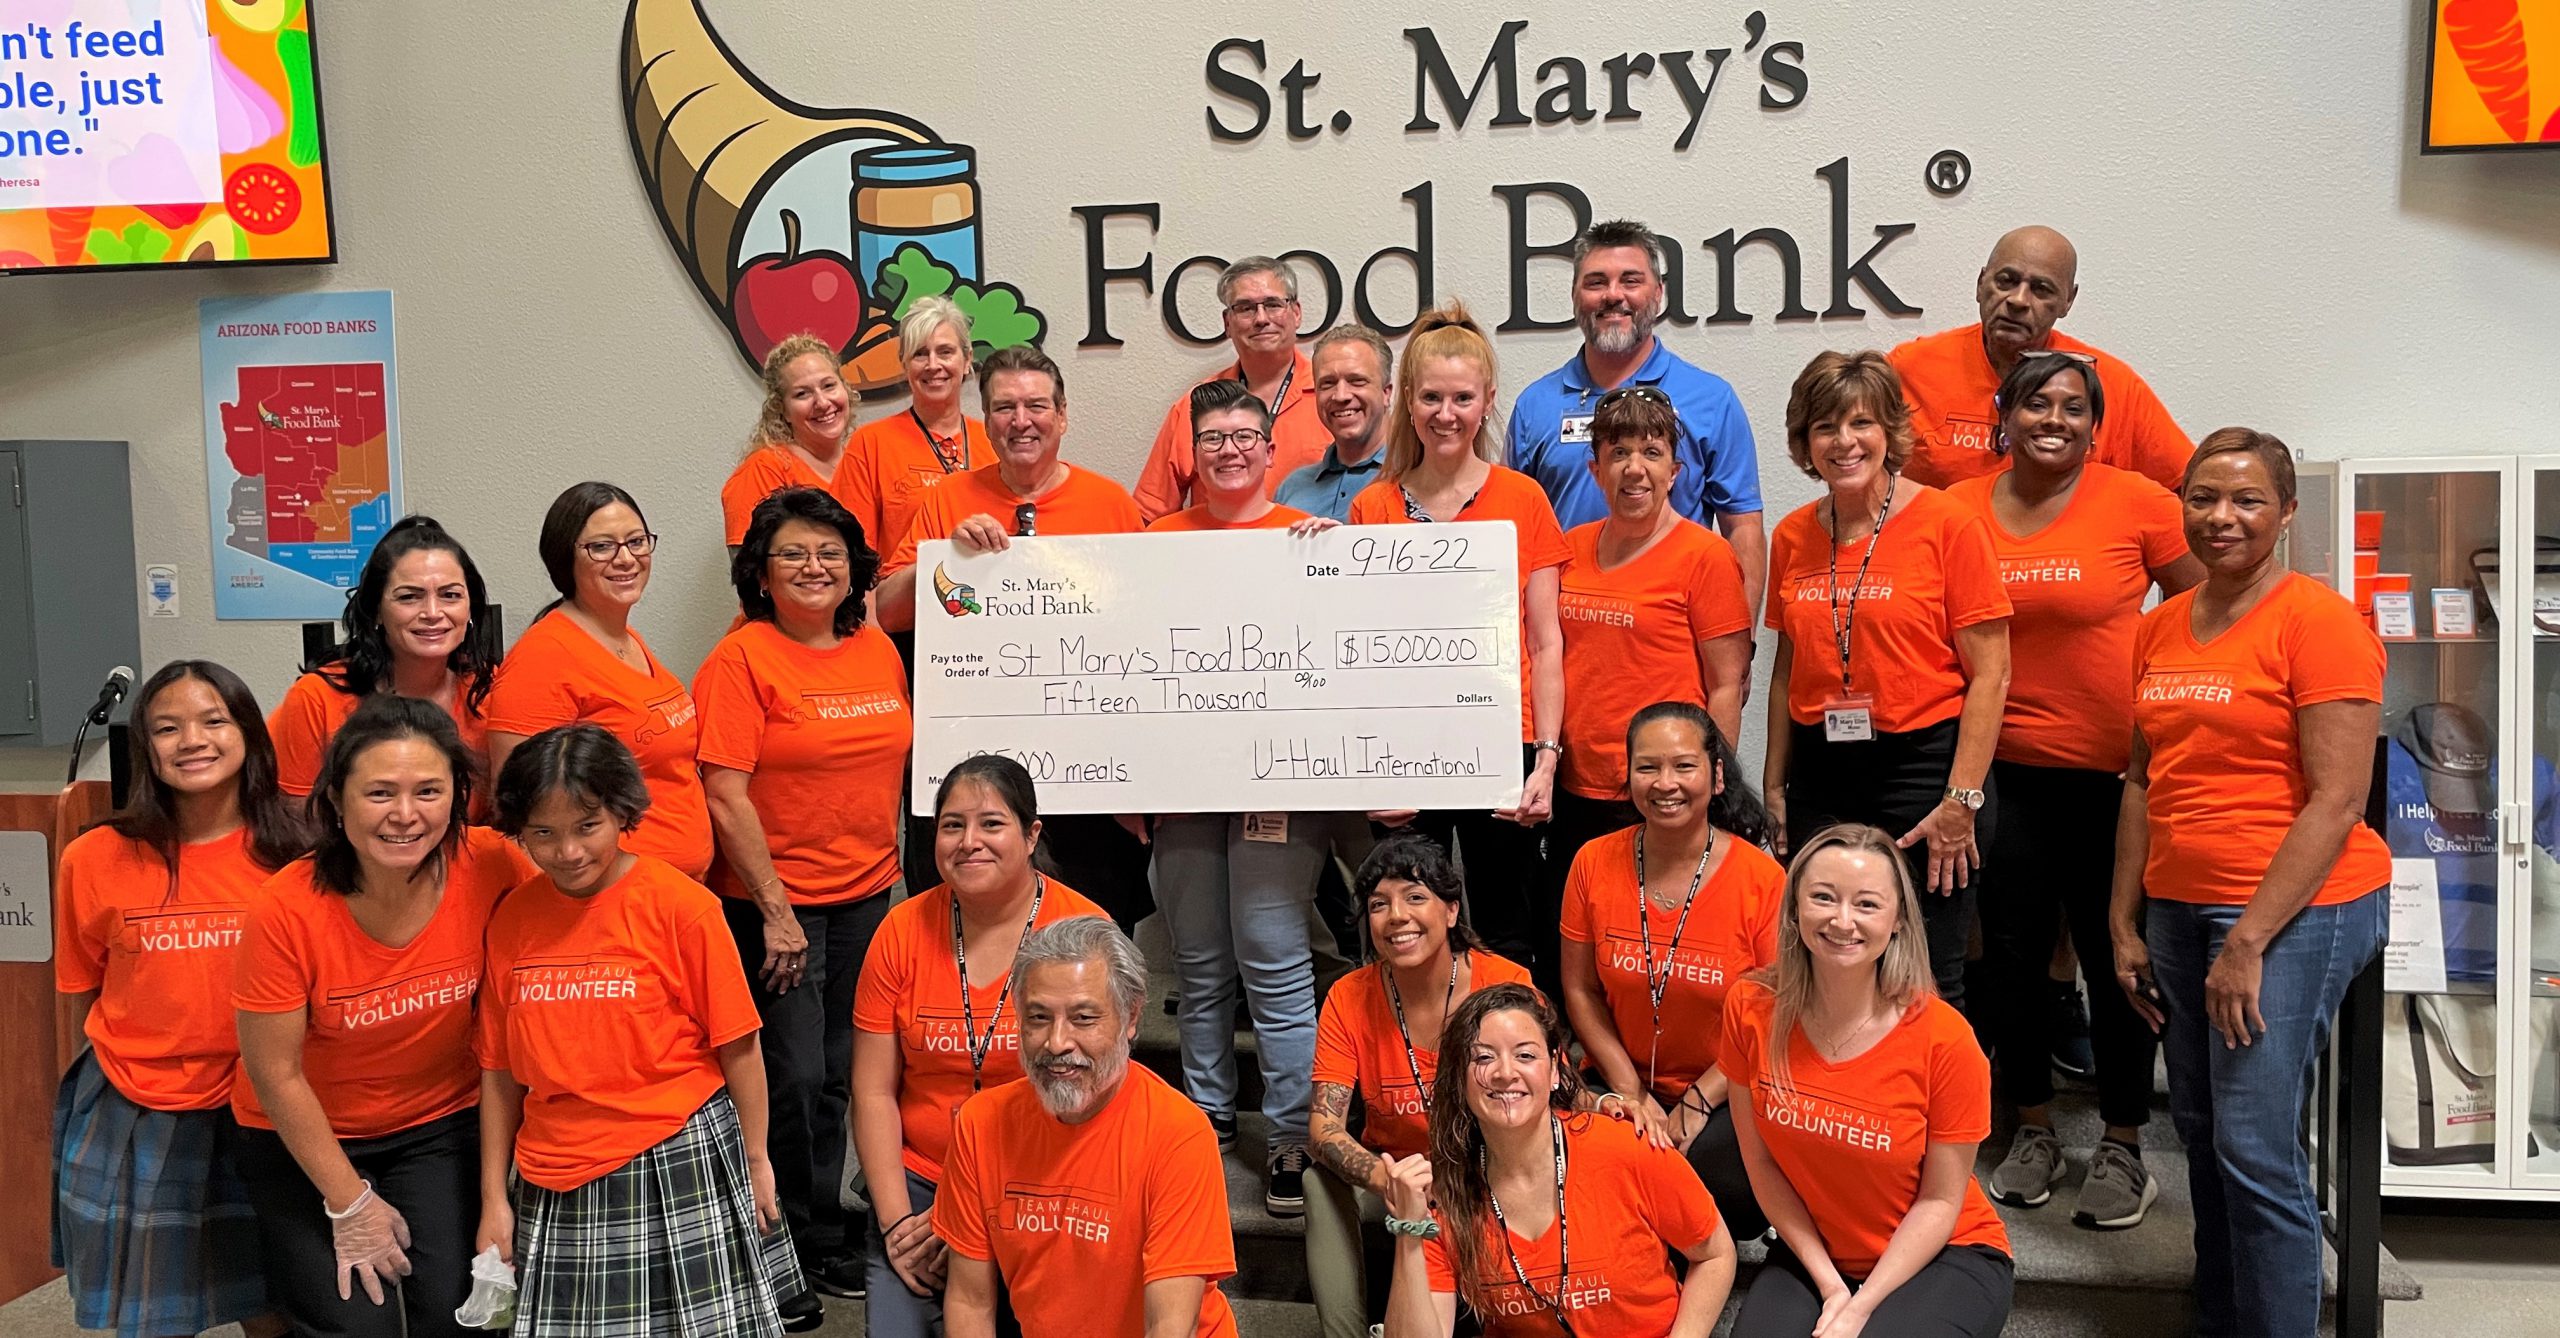 Go Orange Day: U-Haul Supports St. Mary’s Food Bank during Hunger Action Month